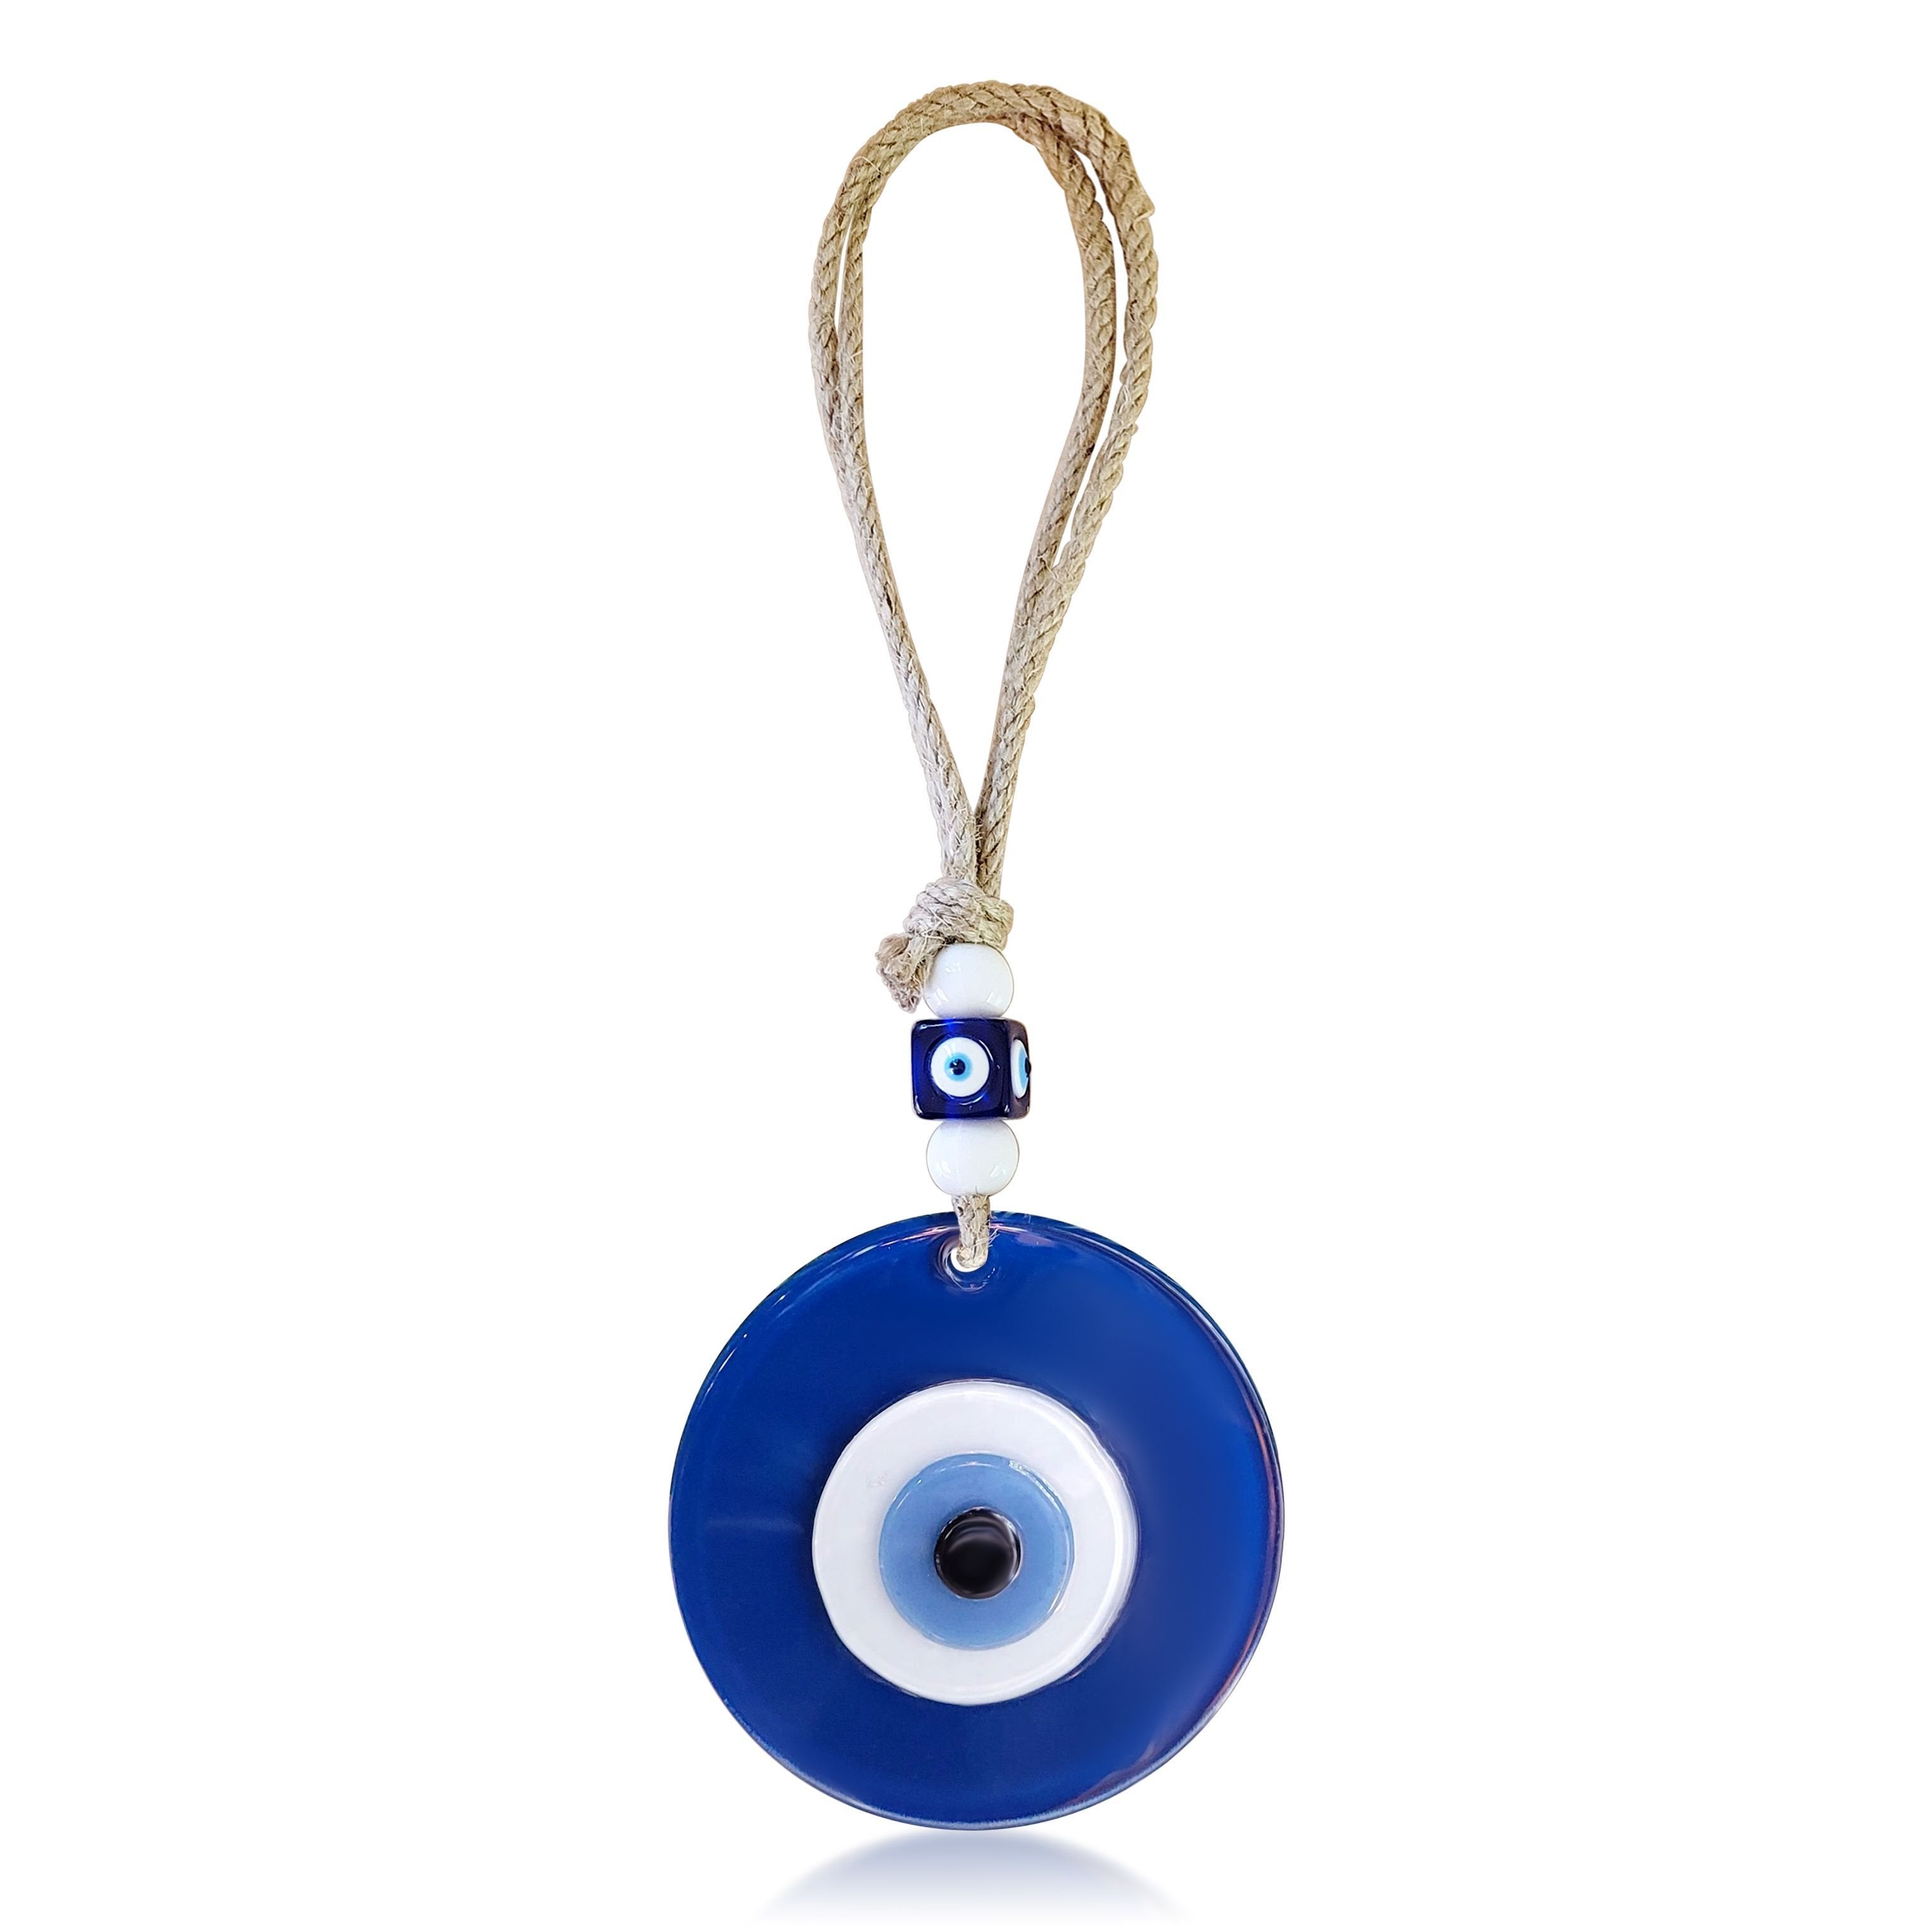 meaning of a blue evil eye